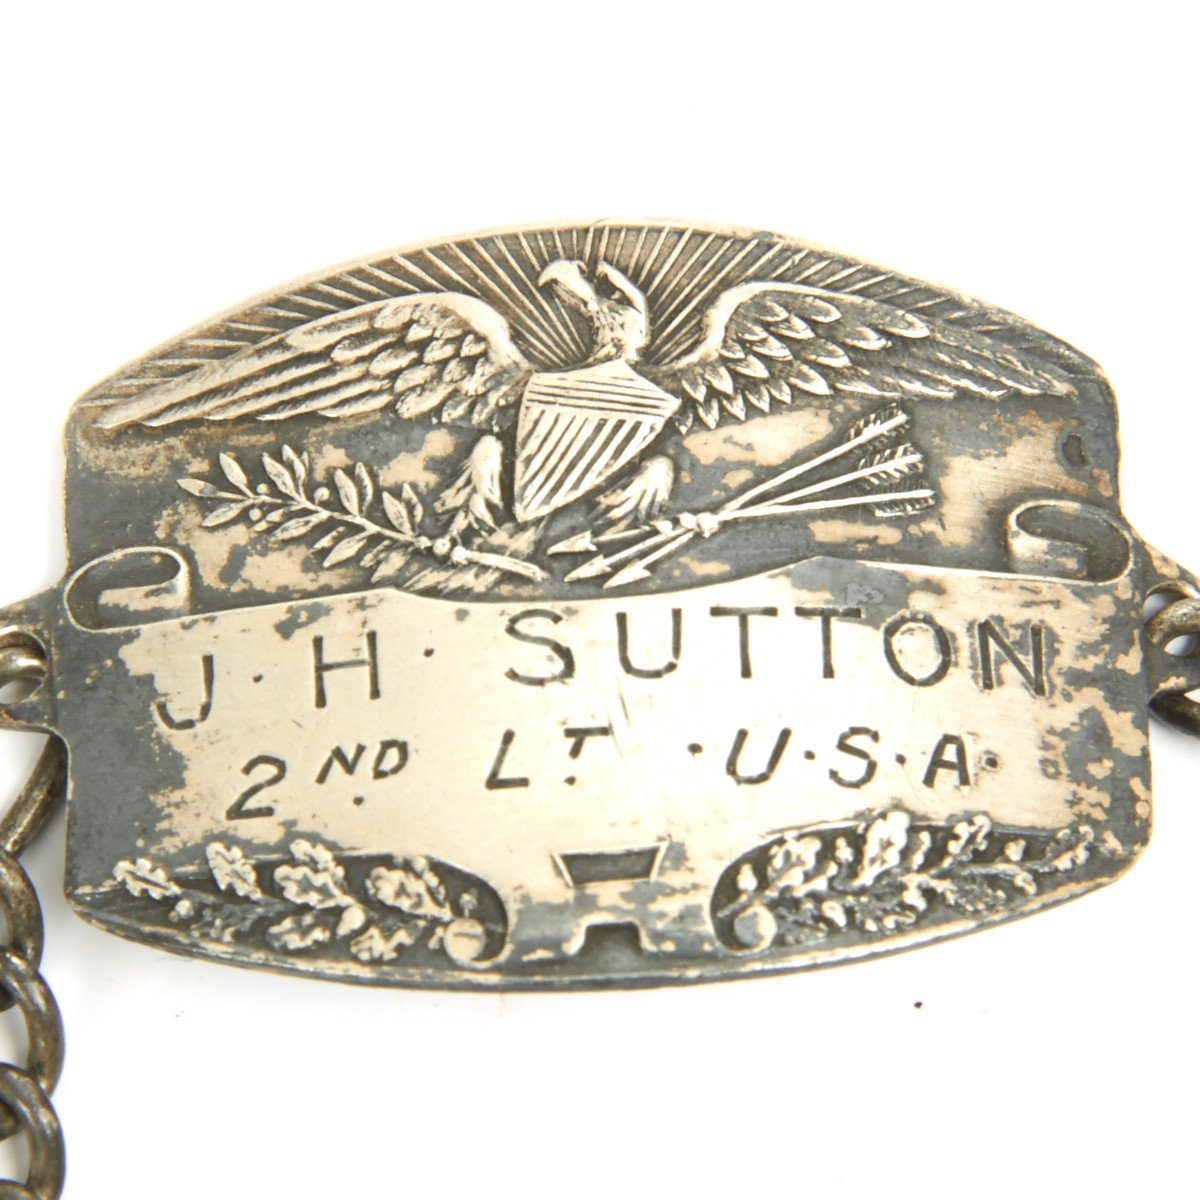 Sold at Auction: WWII US Army Foot Locker Reissued-Dated 1942